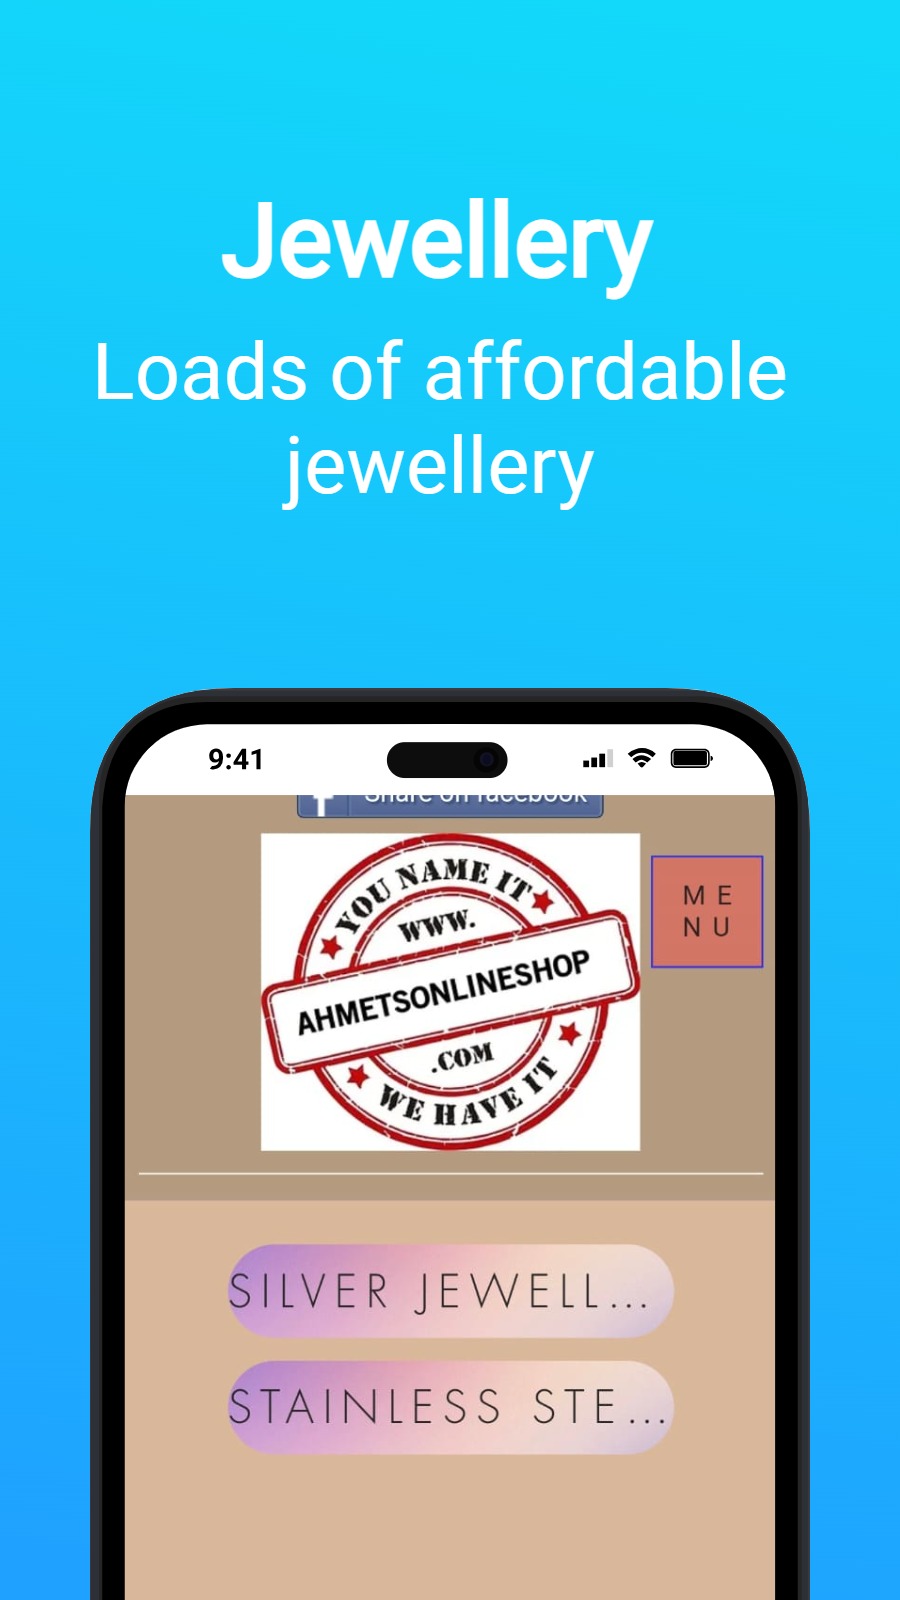 Jewellery - Loads of affordable jewellery